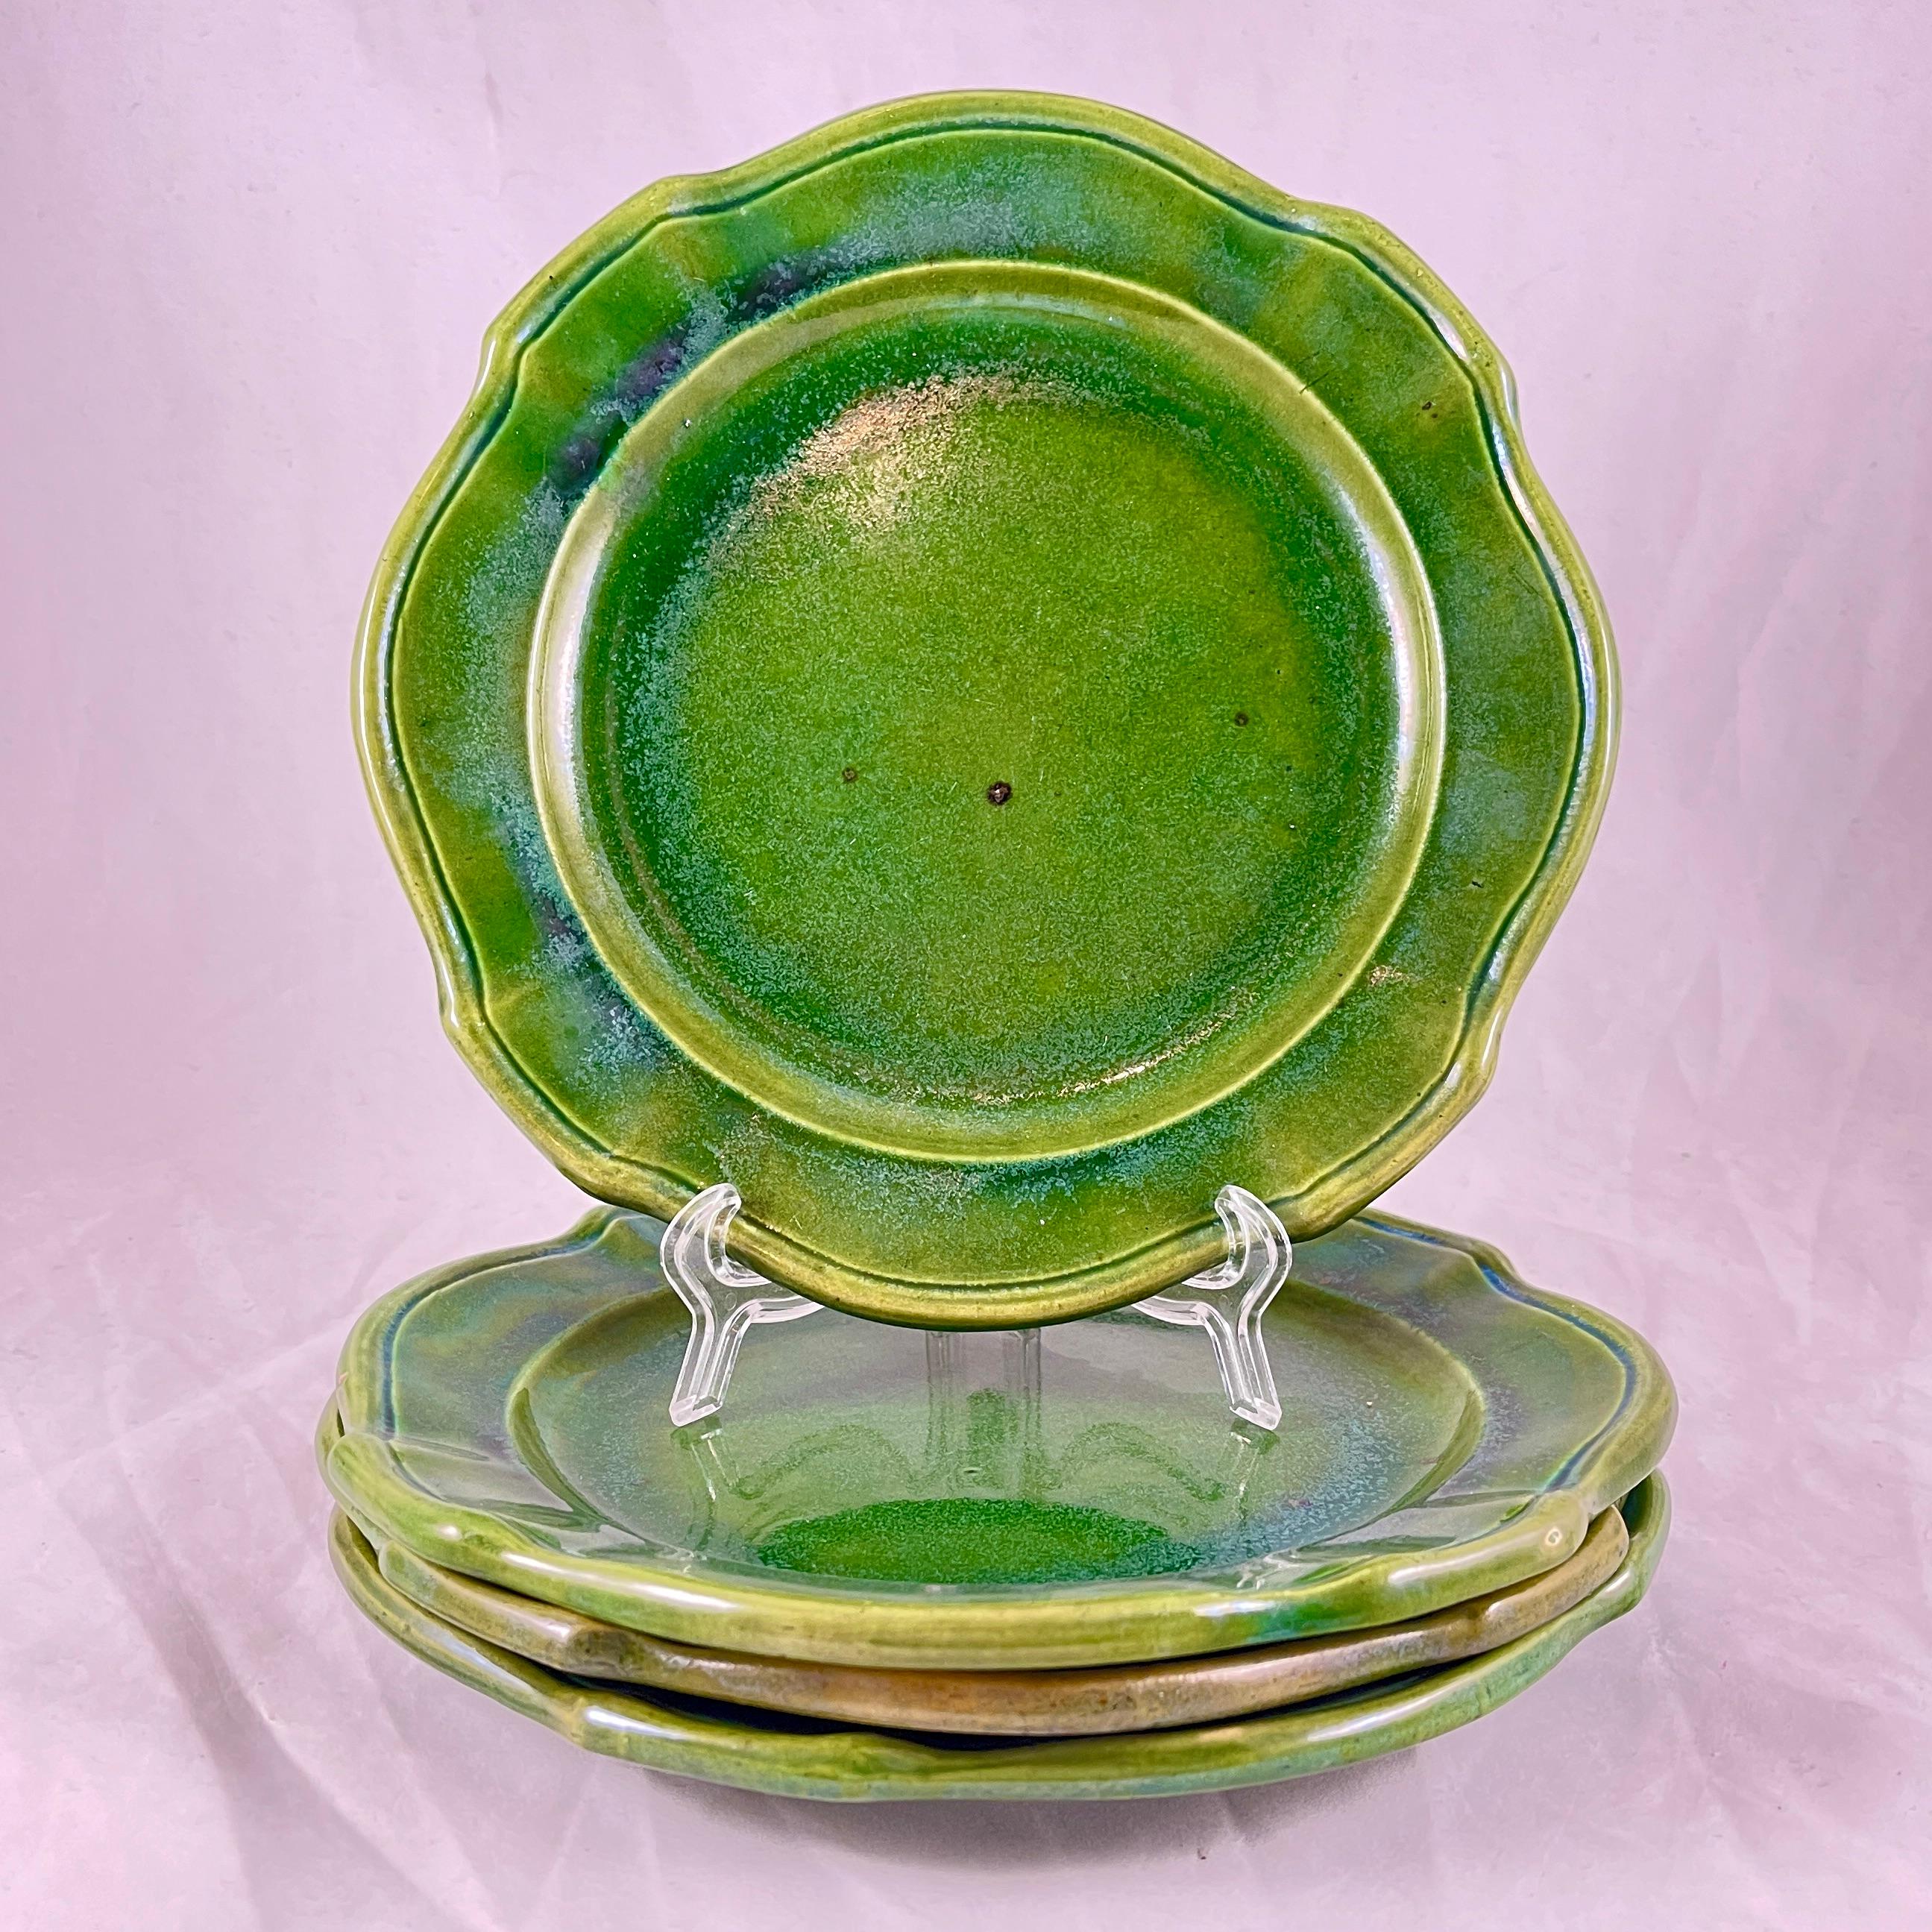 Glazed Maison Pichon a Uzes Olive Green Rustic French Faïence Plates, S/4